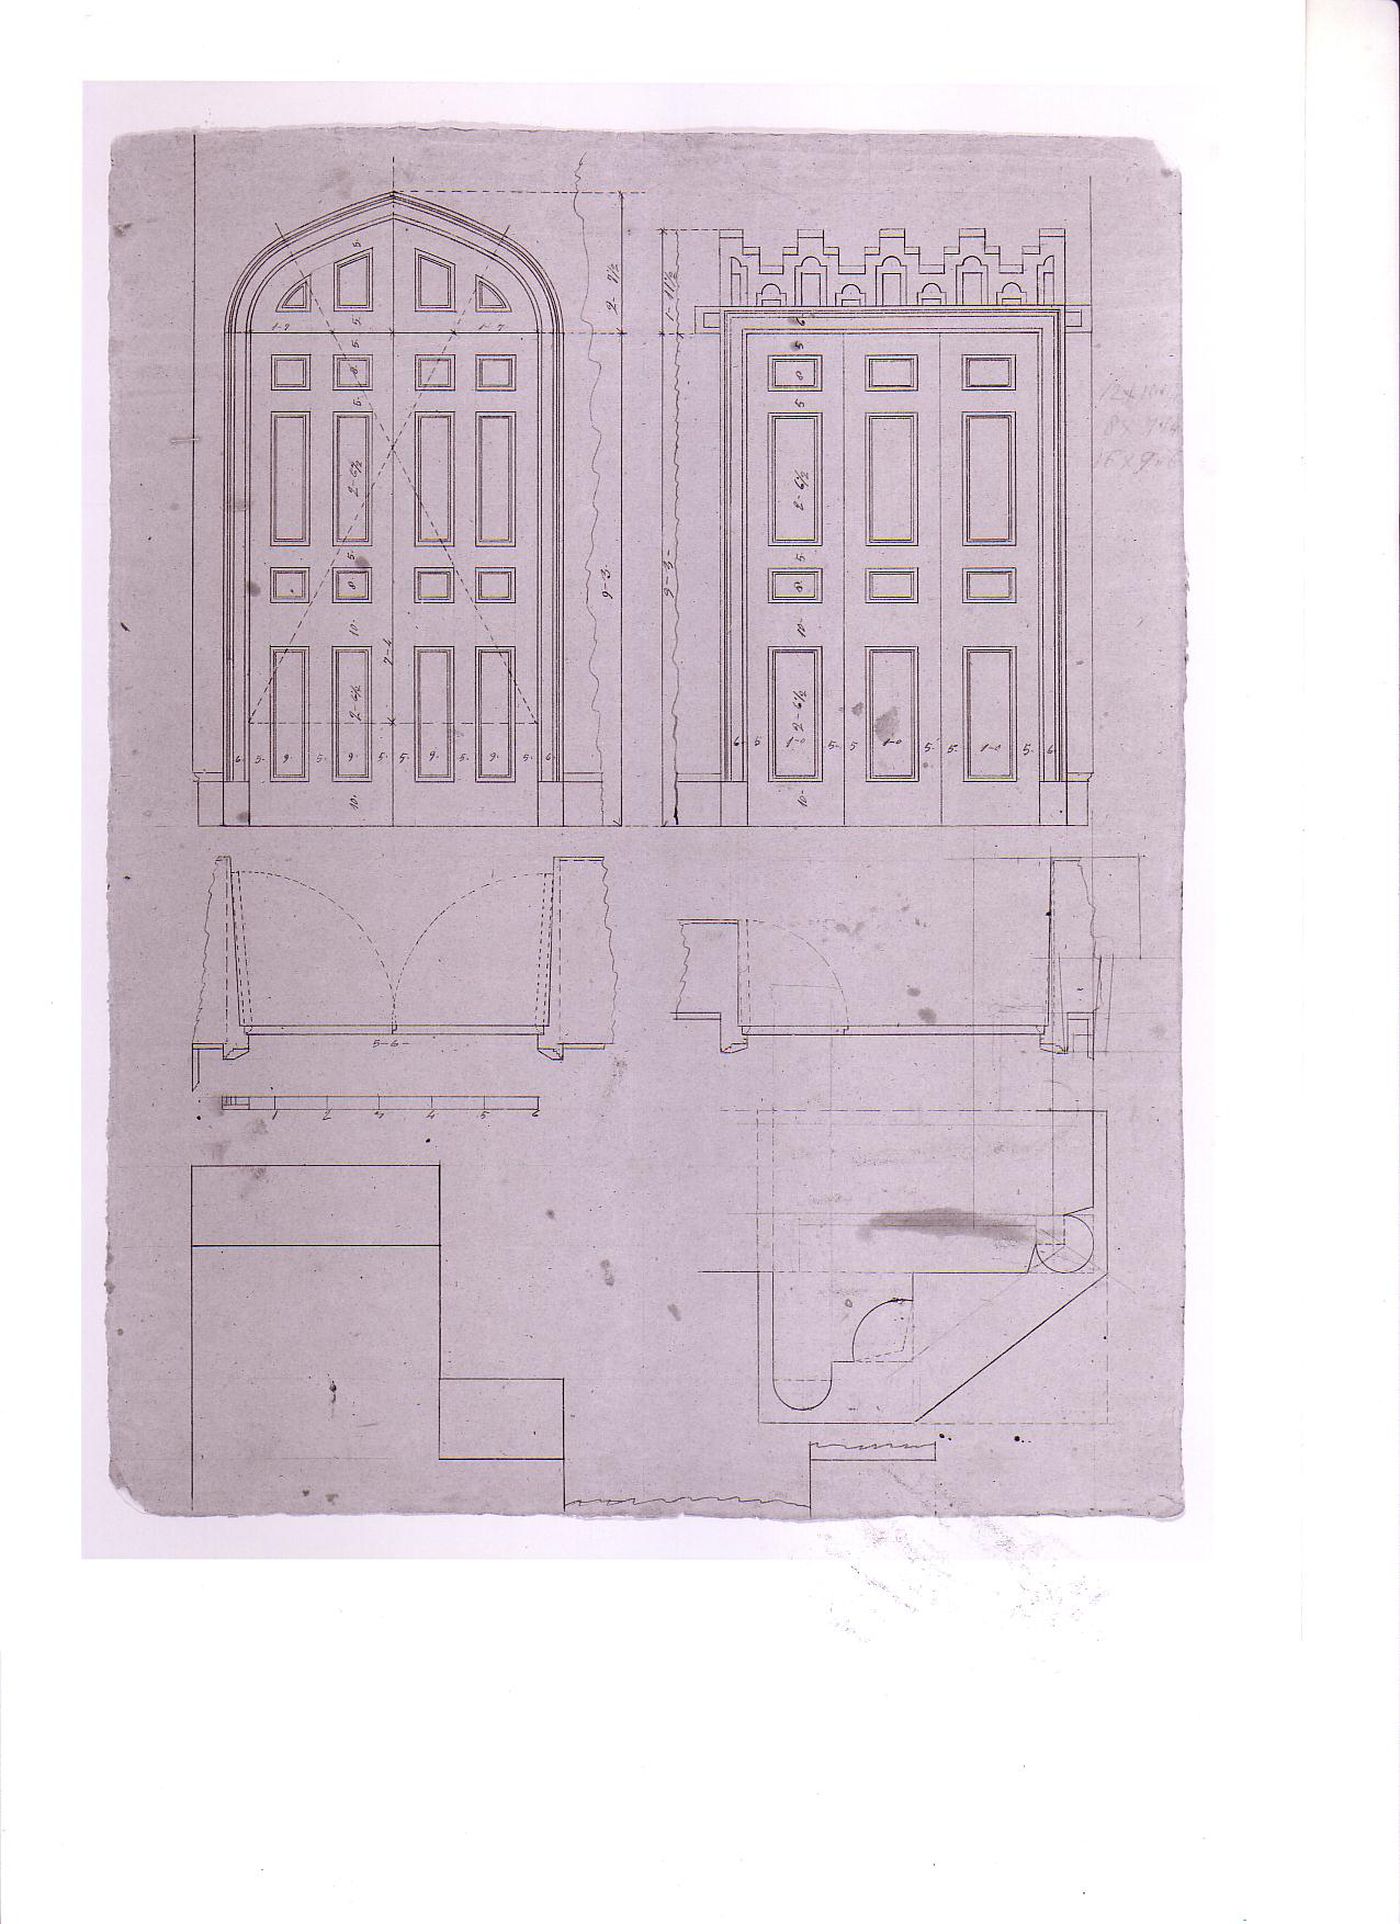 Plans and elevations for side altar [?] doors and section for a decorative detail for Notre-Dame de Montréal